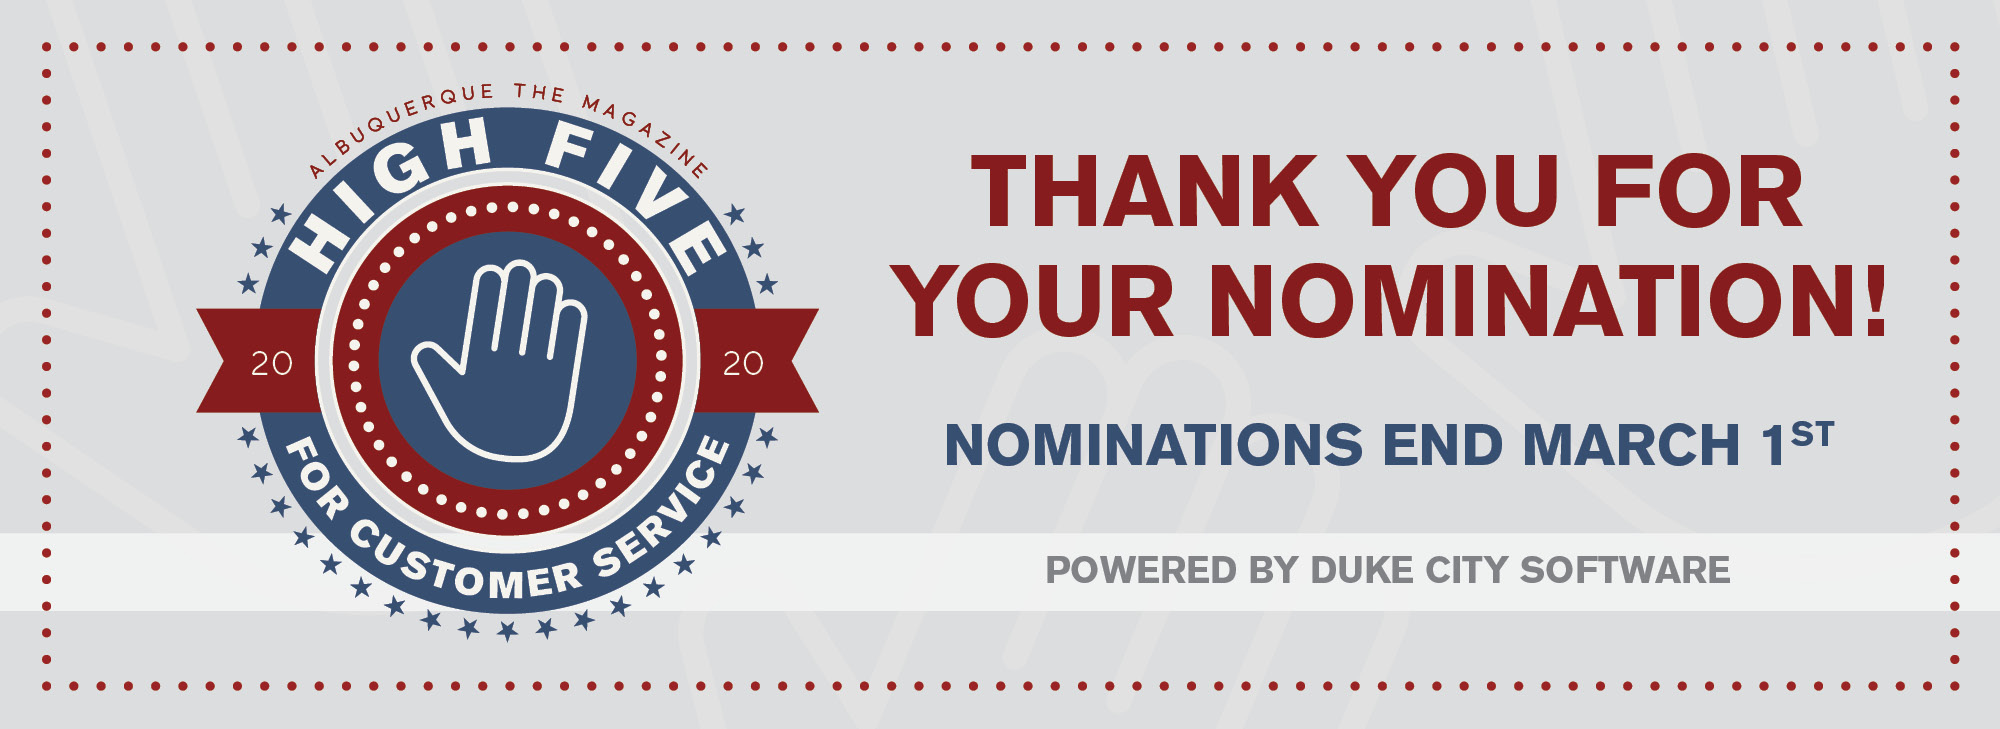 Thanks for Your Nomination!